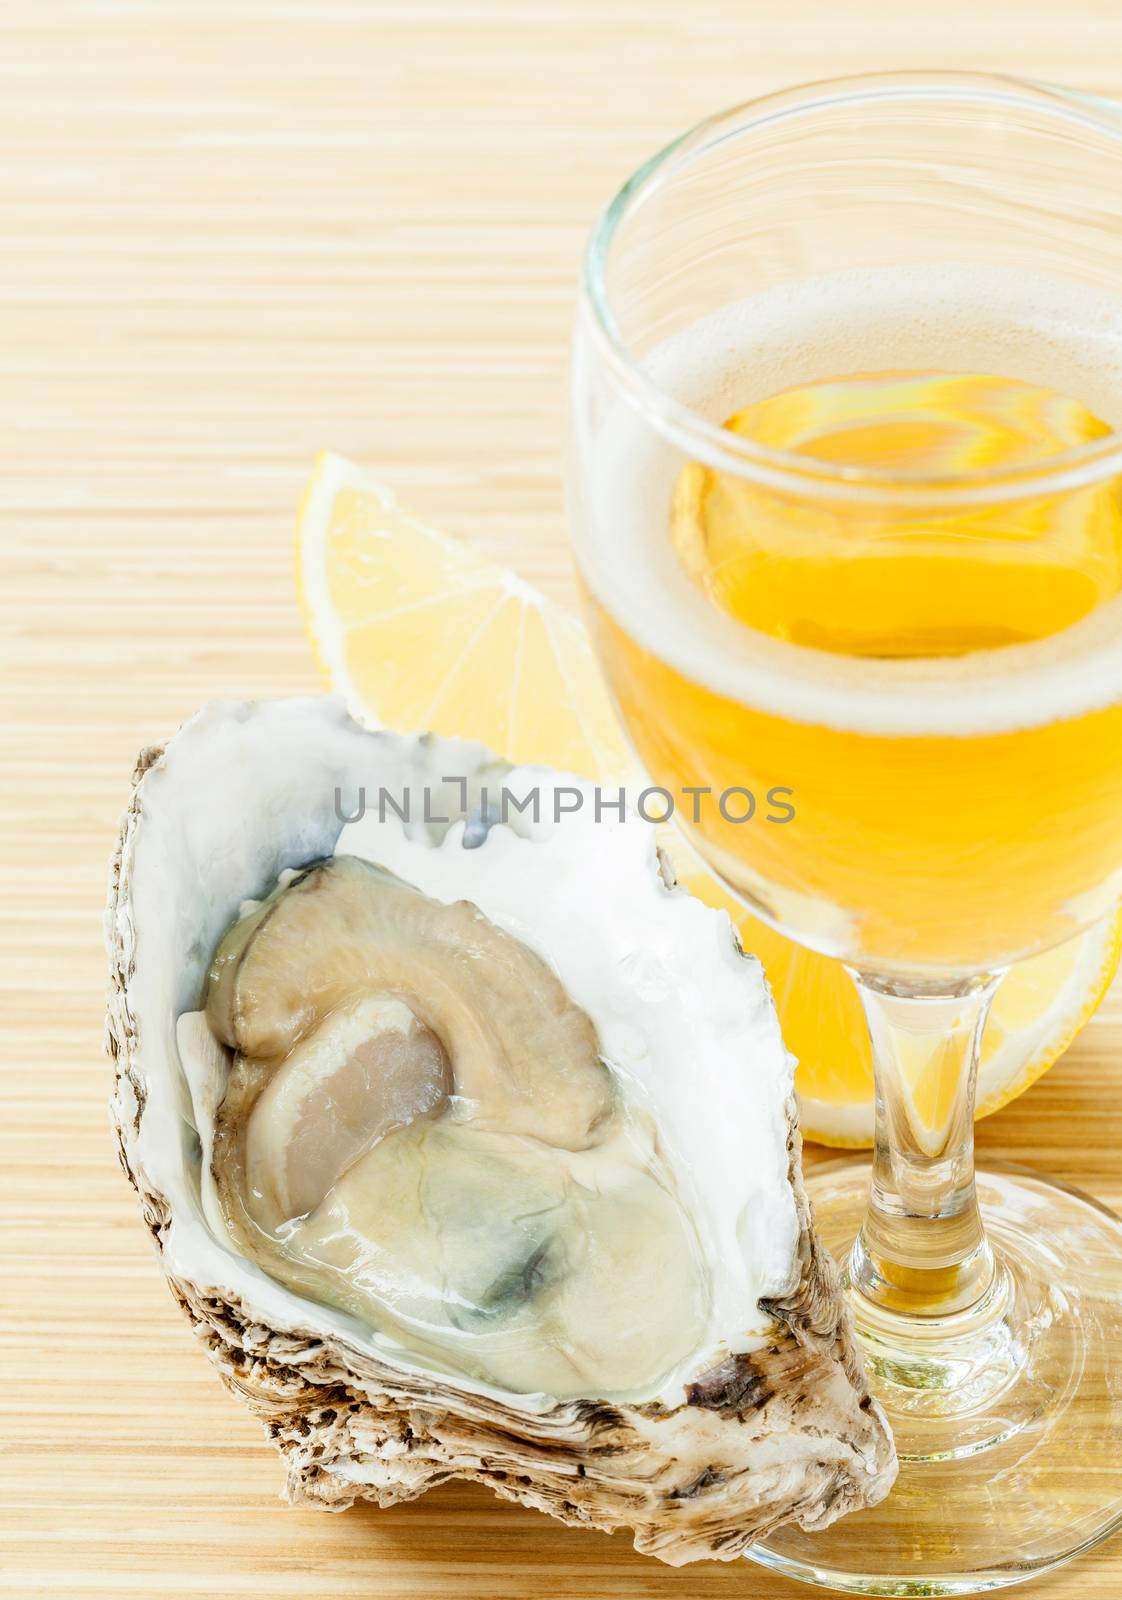 Fresh oysters with lemon and a glass of wine on a wooden table .